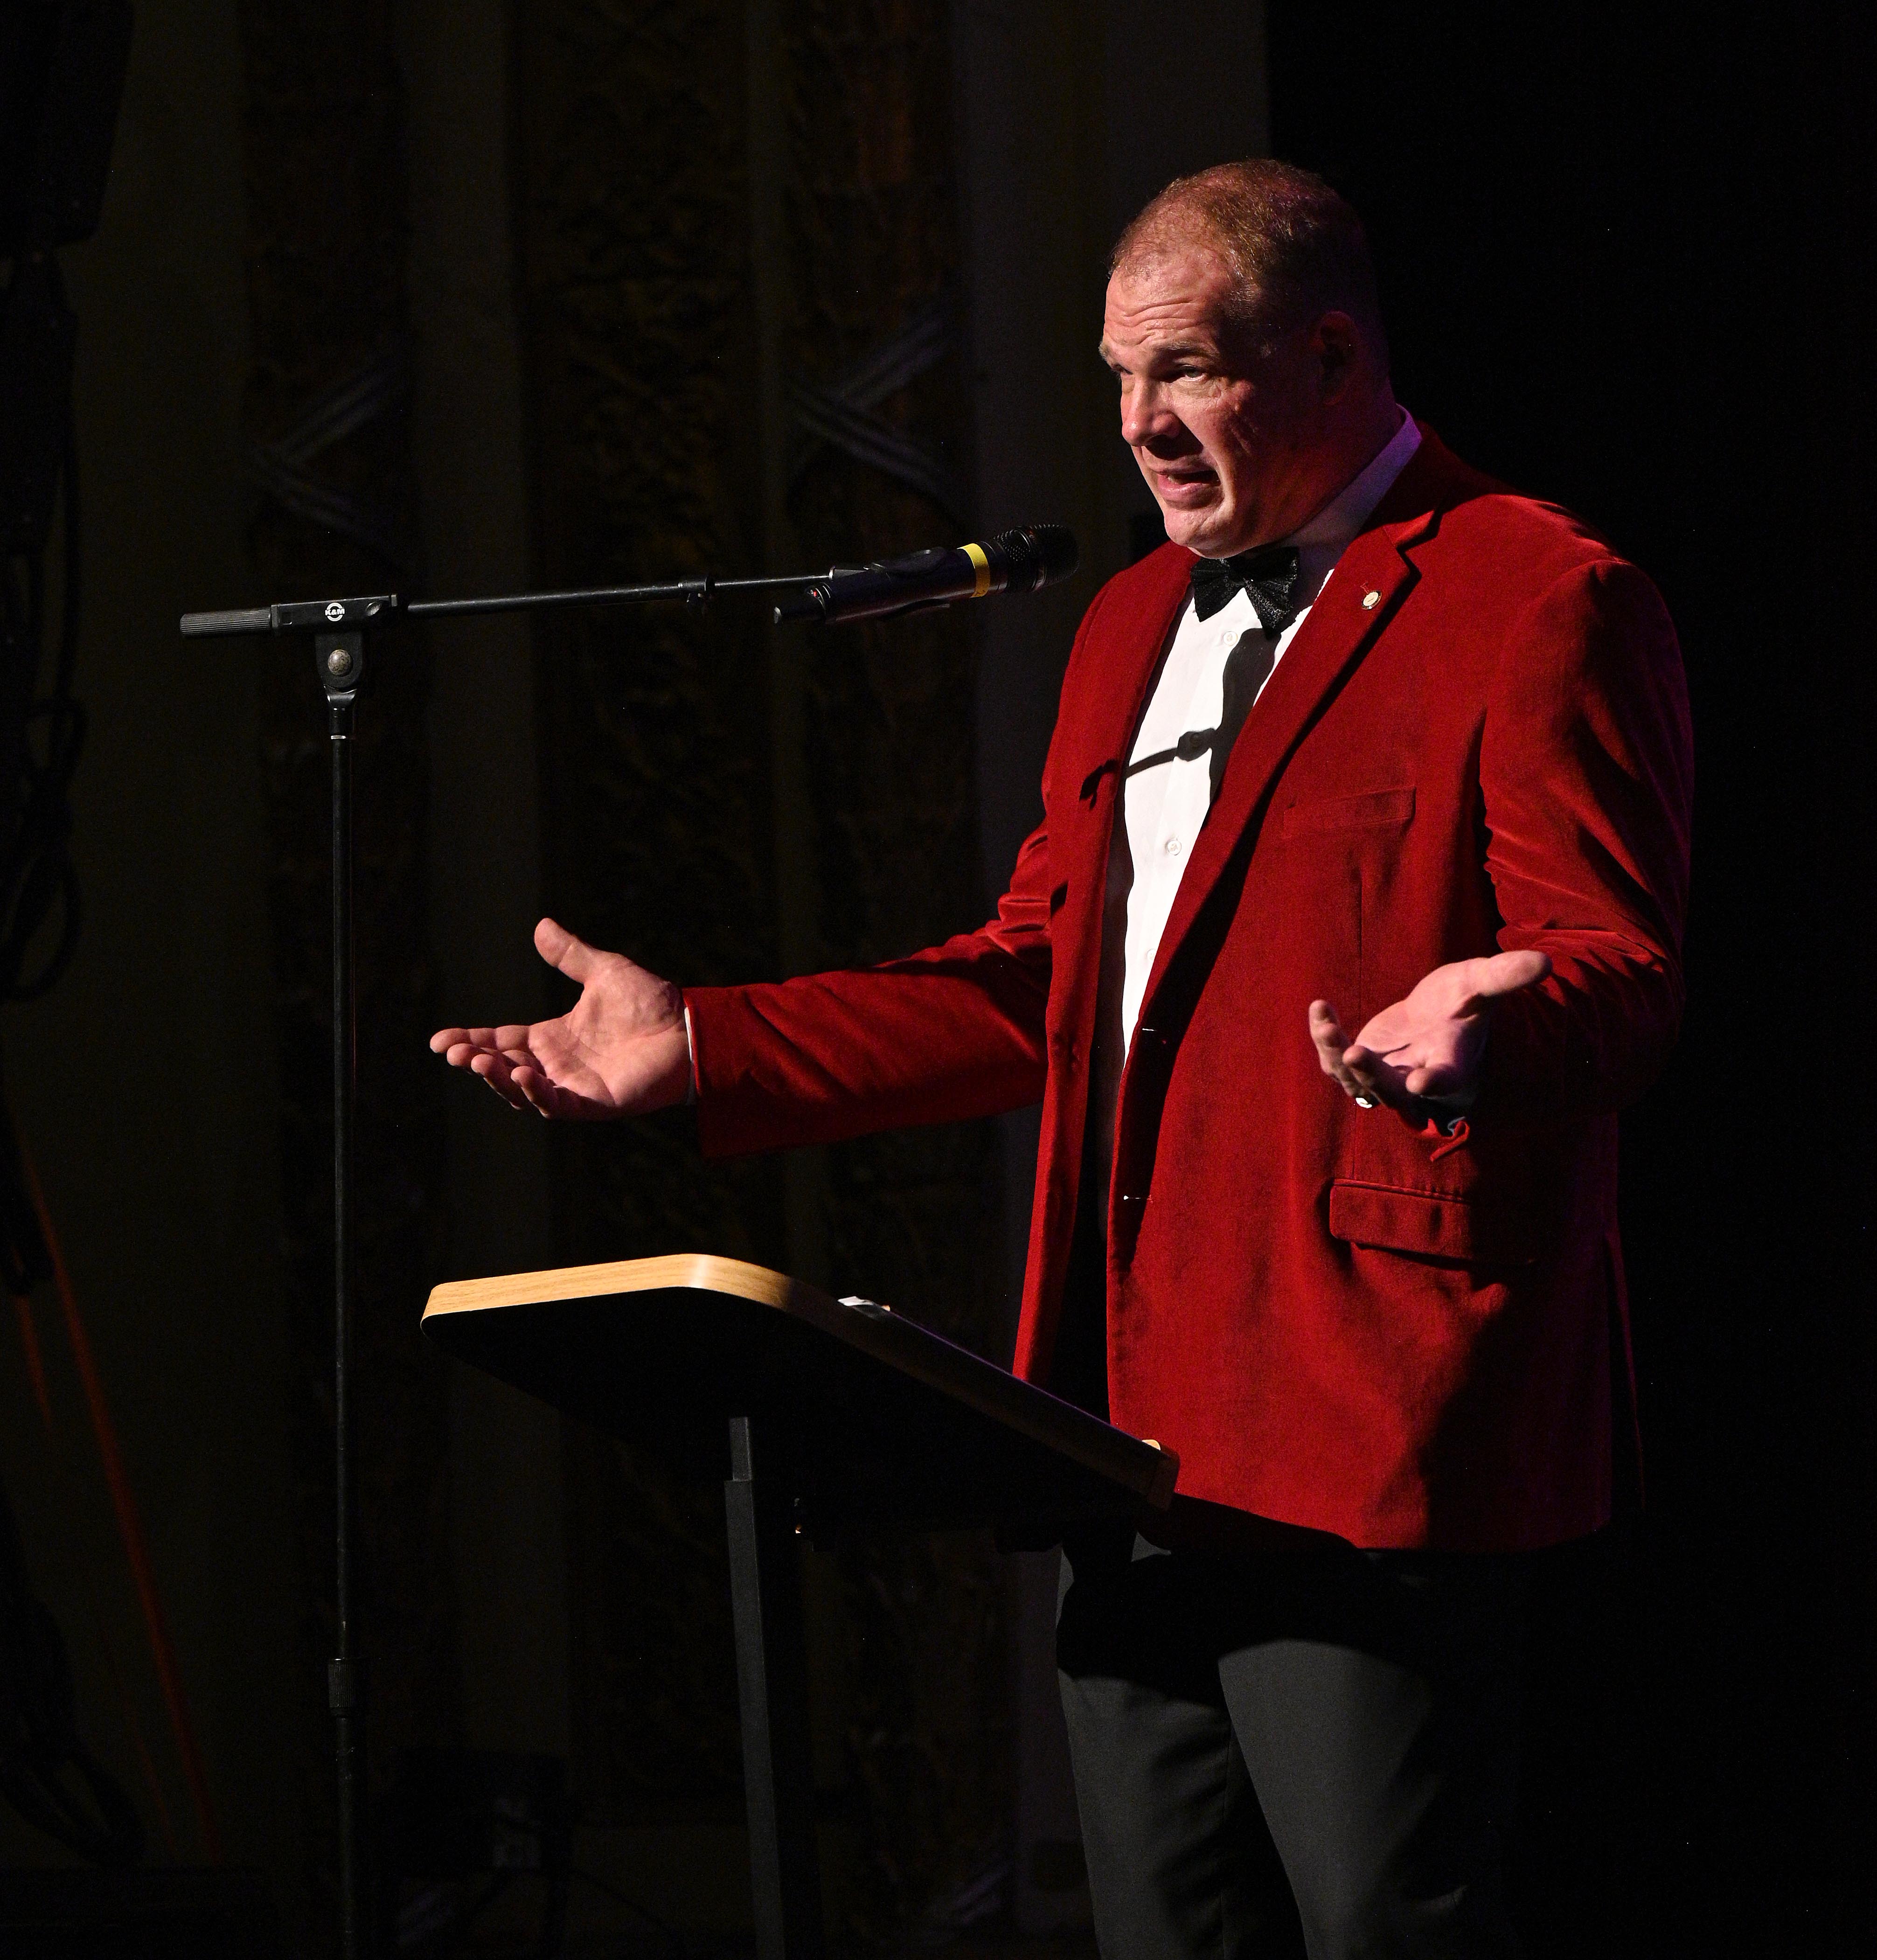 Mayor Glenn Jacobs wears a red velvet jacket, speaking at a microphone on a dark stage, standing with arms out, palms up